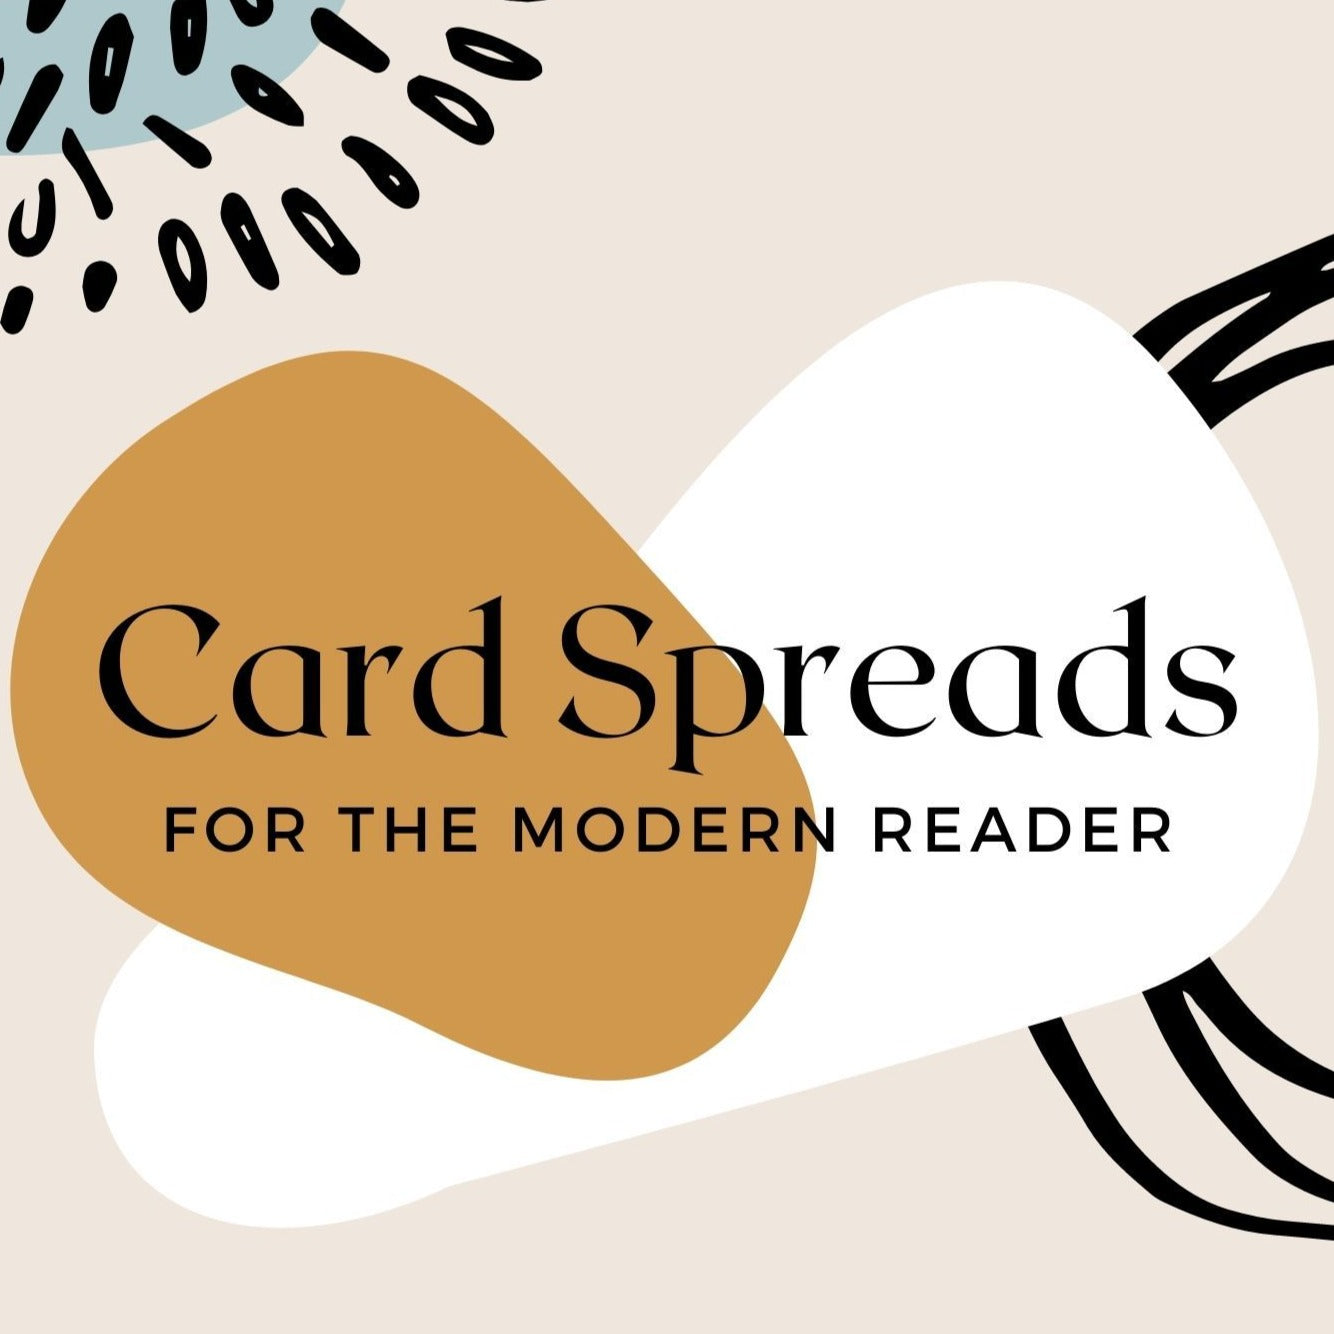 Card Spreads for the Modern Reader